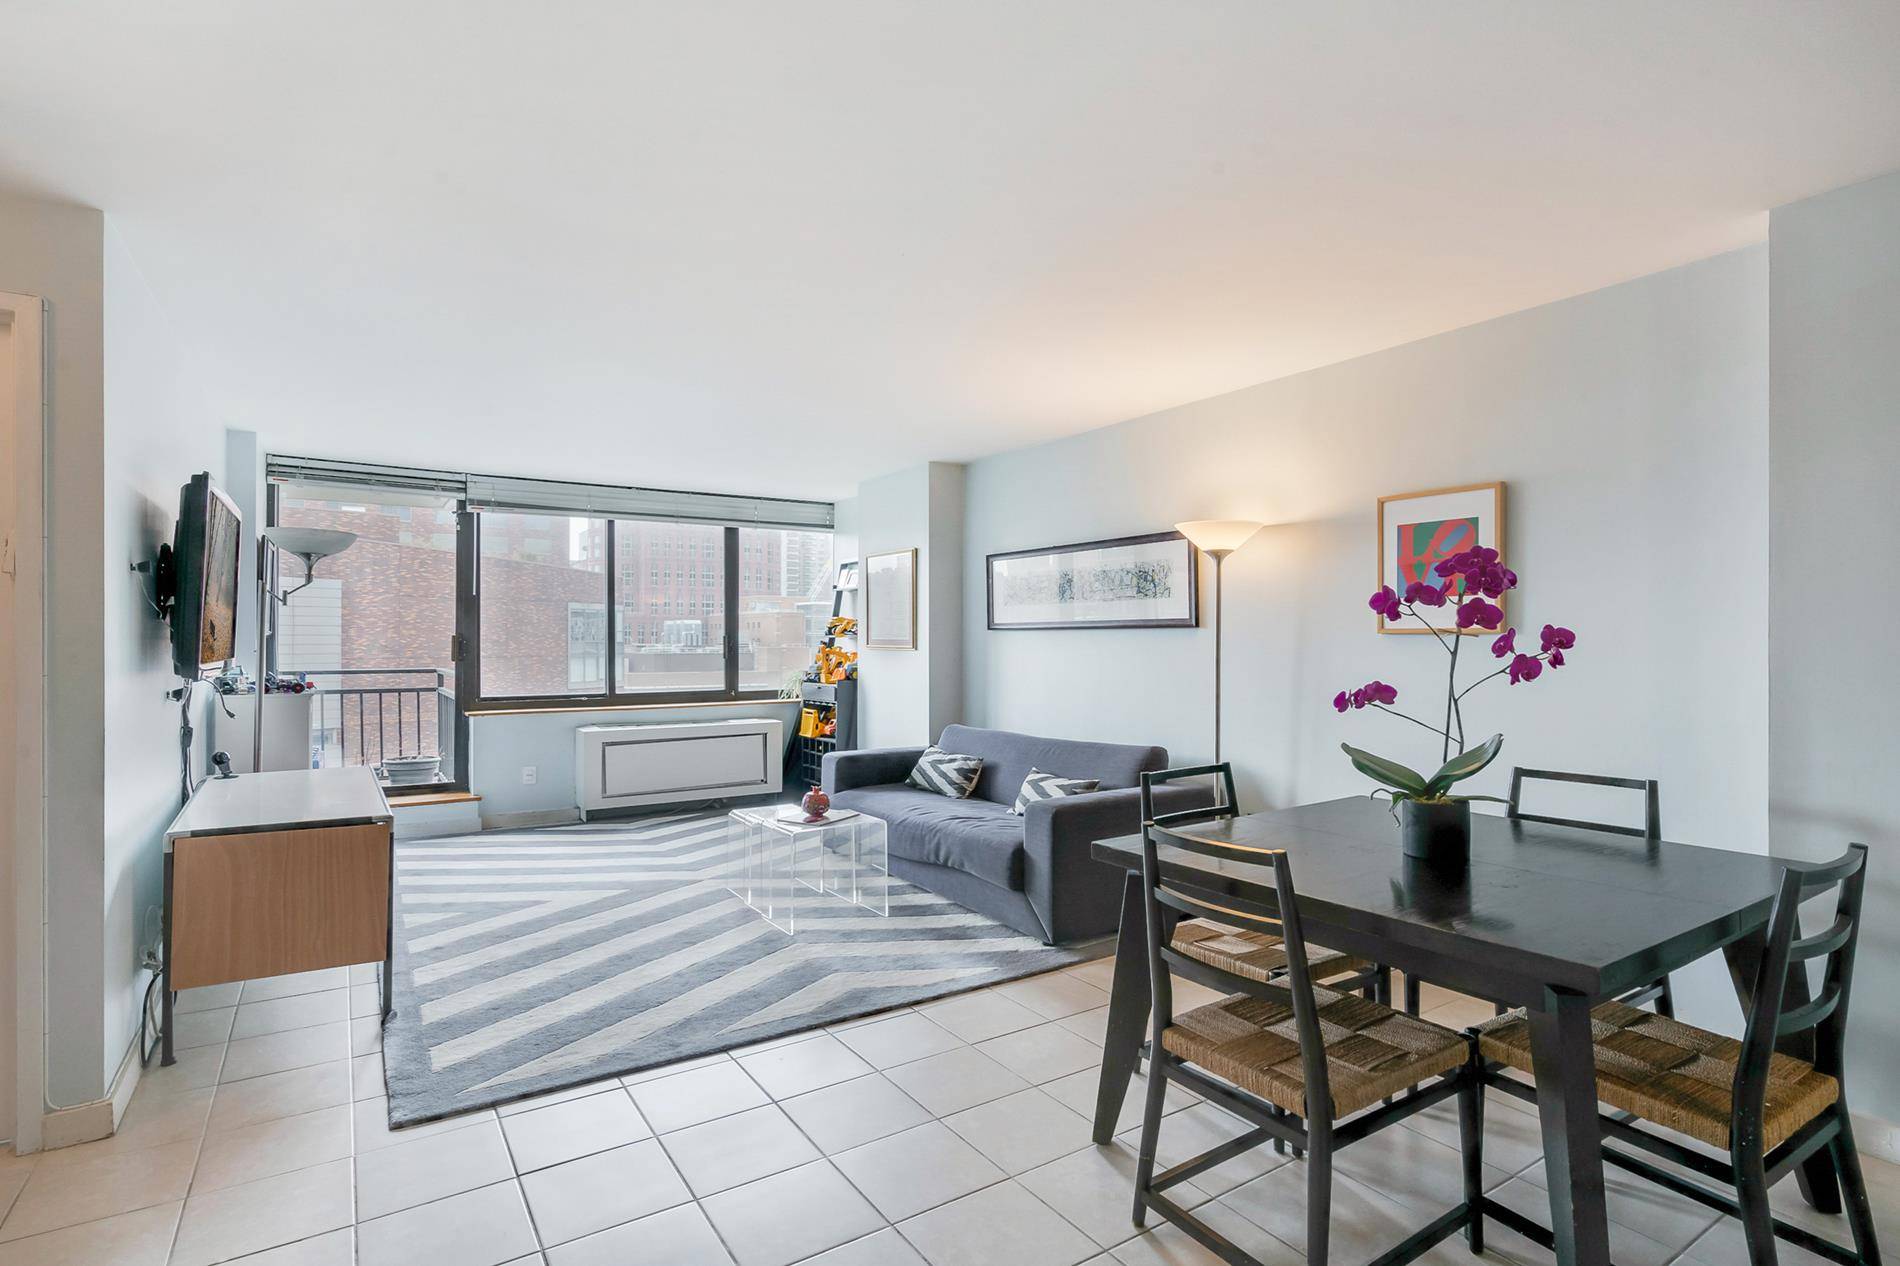 67 68 Sts Bway Lux DM Condo 2BR 2BA BALCONY BEST DEAL ON THE MARKET !